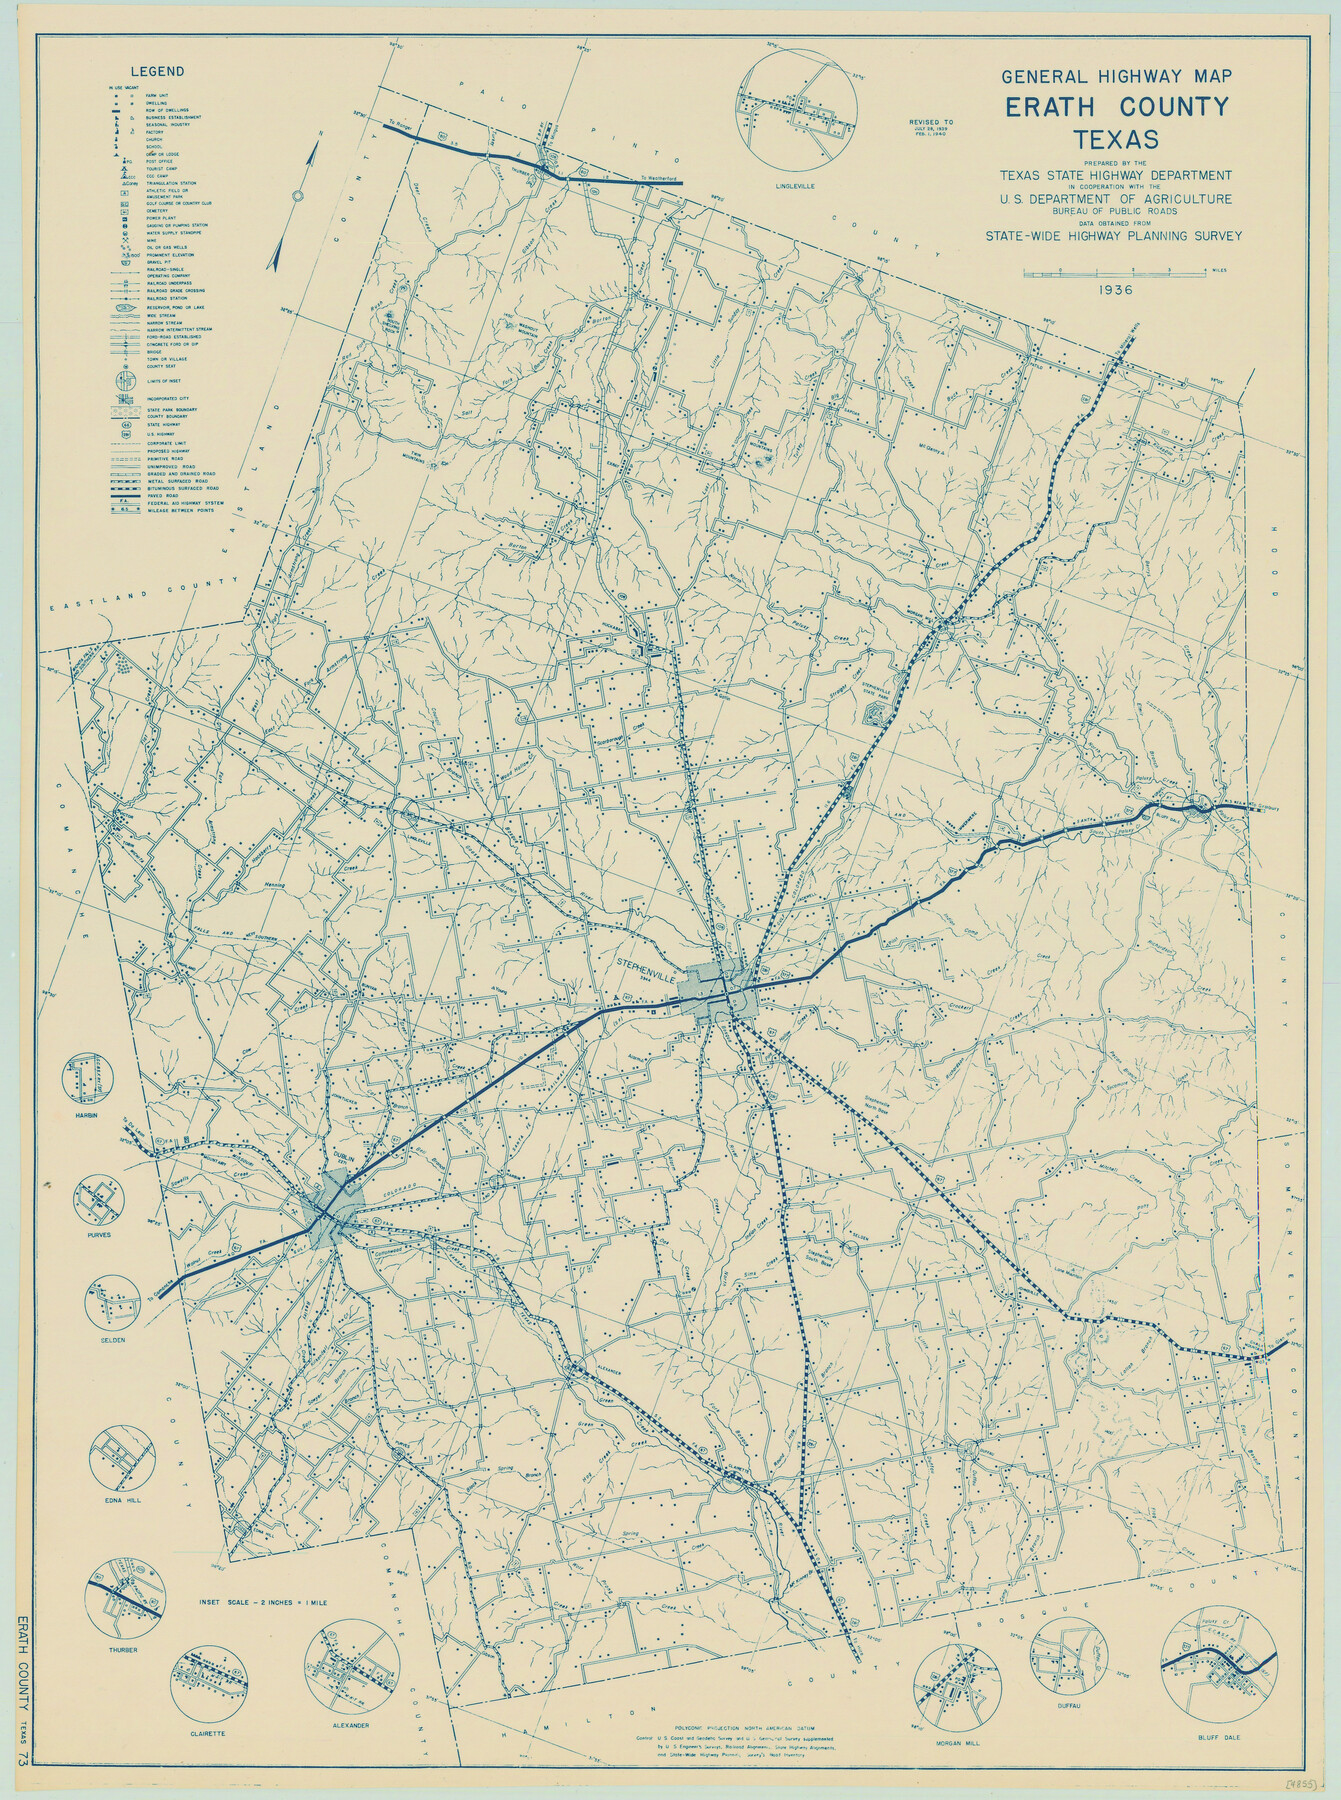 79086, General Highway Map, Erath County, Texas, Texas State Library and Archives